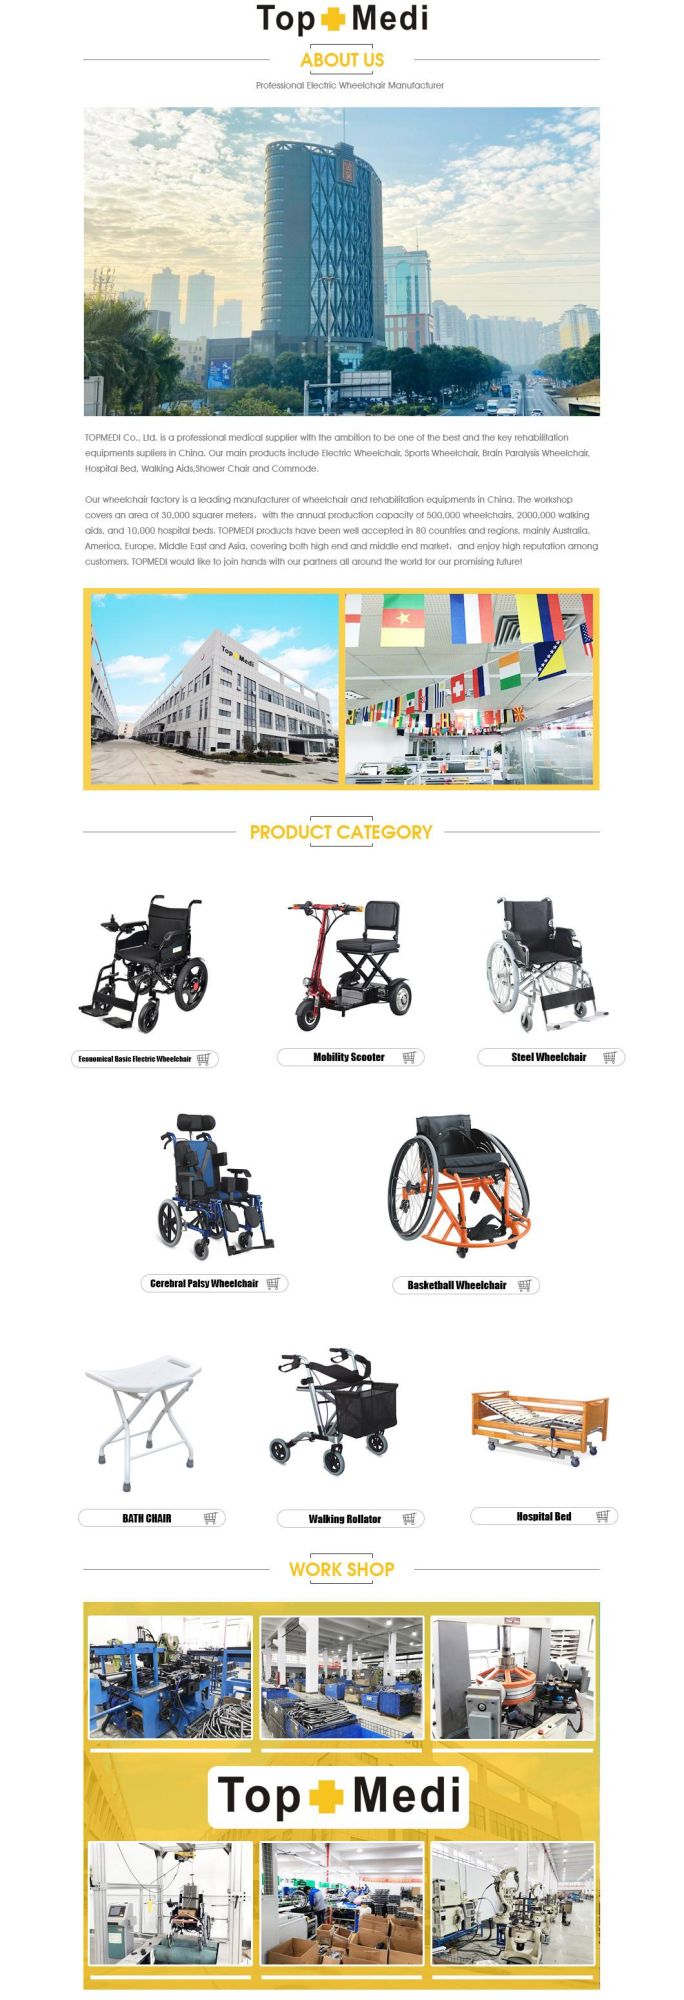 ODM Elderly Multi-Function Multifunctional Mechanical Lifting Wheelchairs Transferring Patient to Transfer Commode Wheelchair